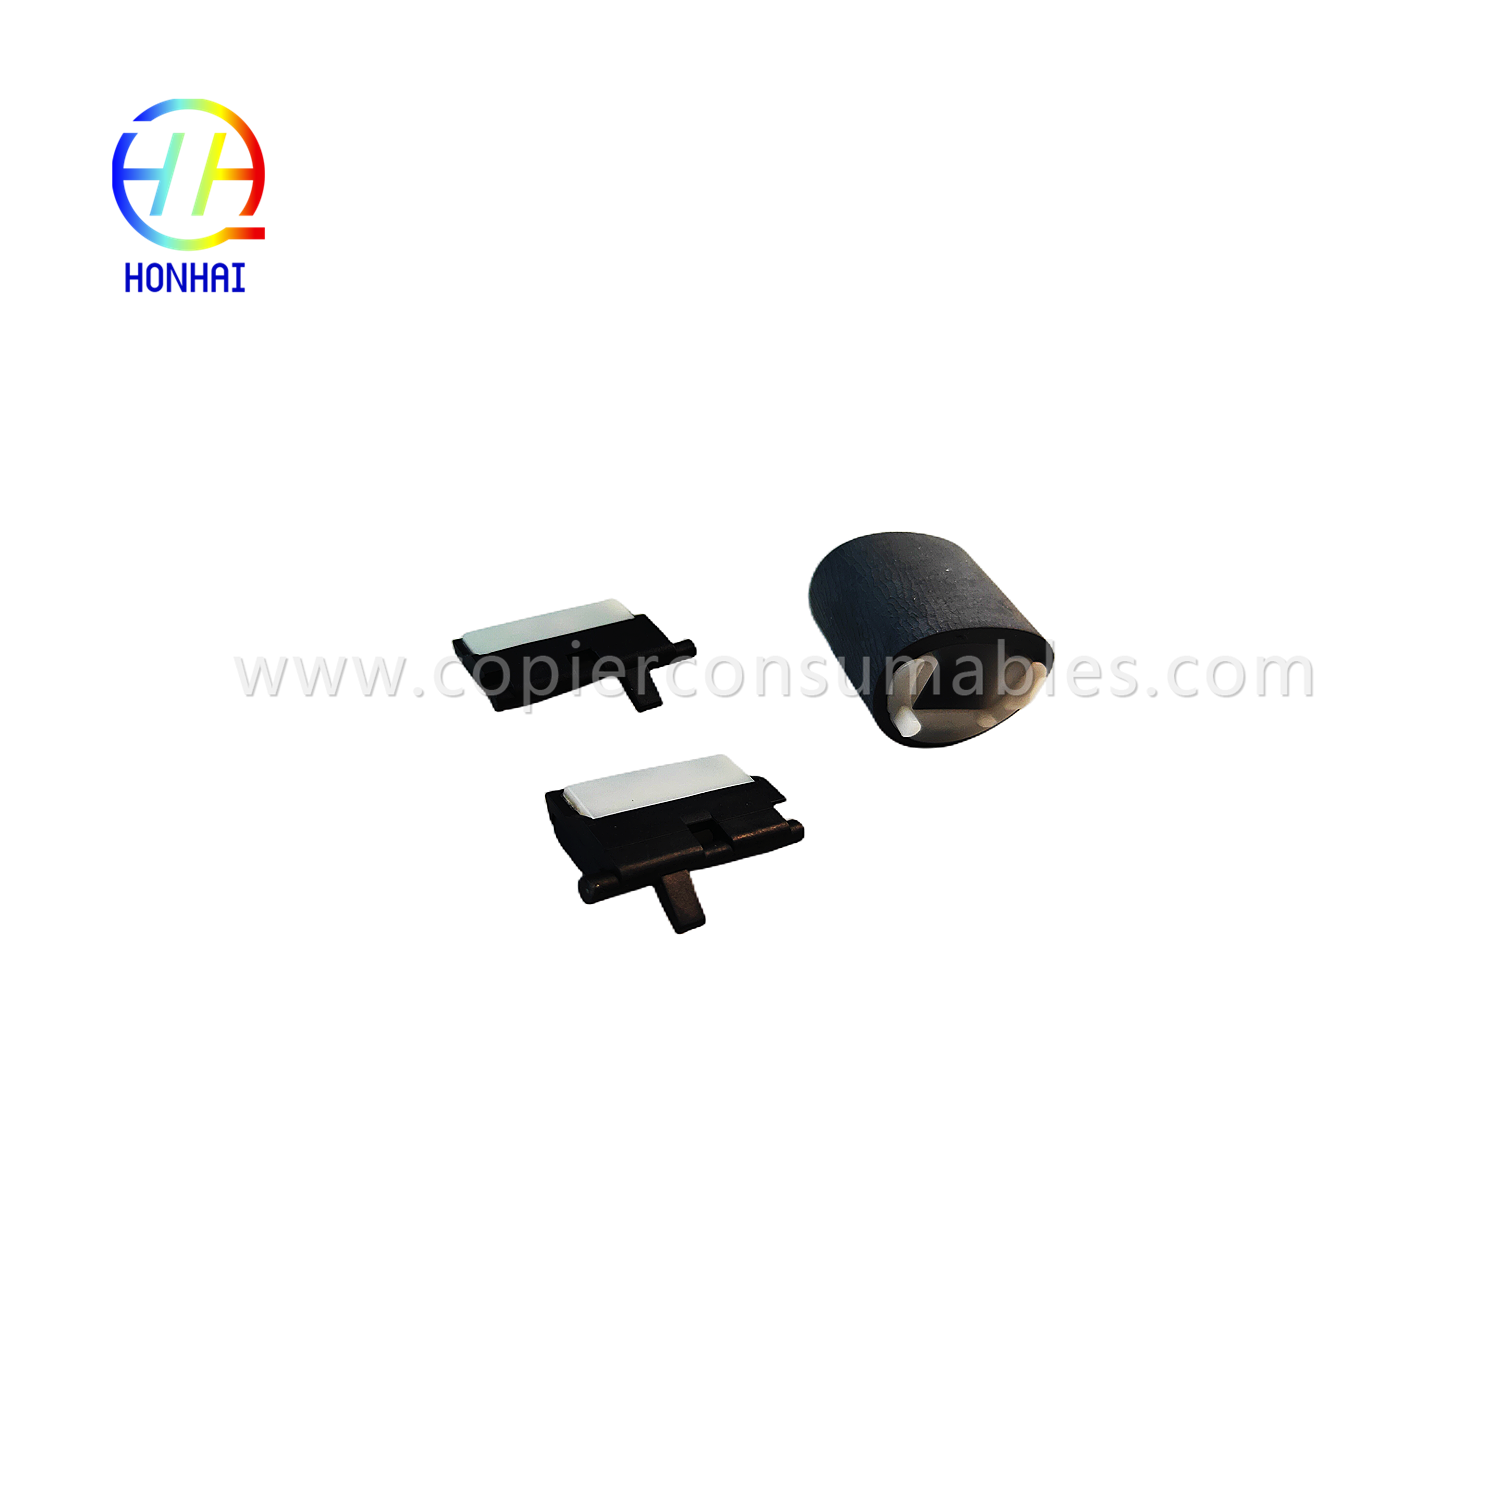 https://www.copierconsumables.com/paper-pickup-roller-separates-pad%ef%bc%88set%ef%bc%89for-hp-pagewide-x585z-x451dn-x476dn-x551dw-x576dw-556dn-586- 452dn-477dn-552-577z-cb780-60012-product/